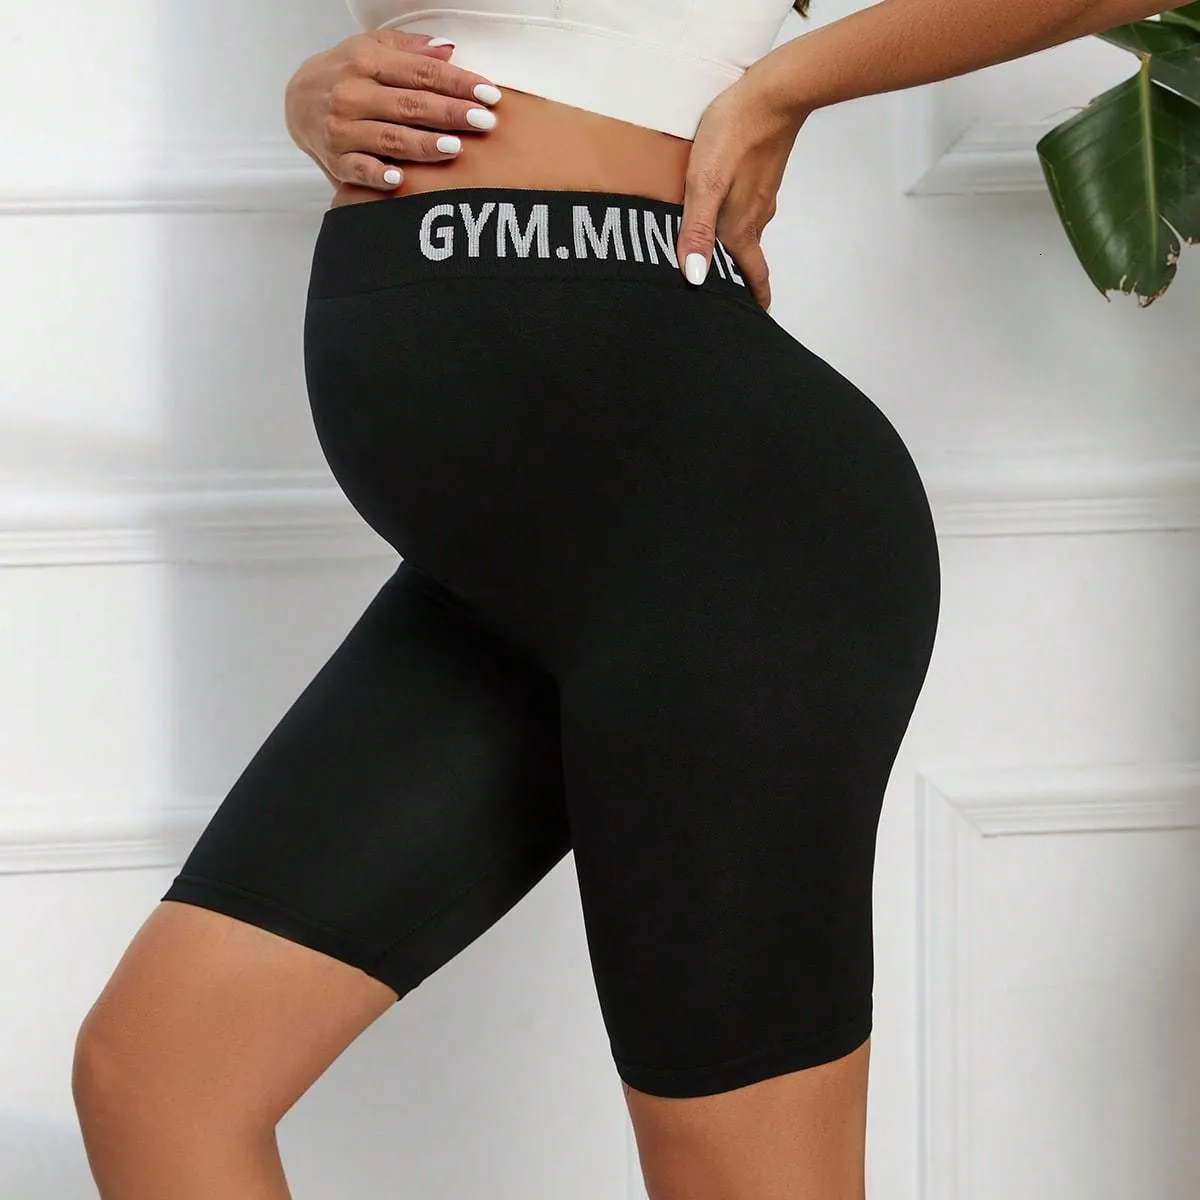 Women's Shorts Maternity Shorts Over The Belly Biker Workout Yoga Active Athletic Pregnancy Short Pants High Waist Elasticity Pregnancy Shorts 230717